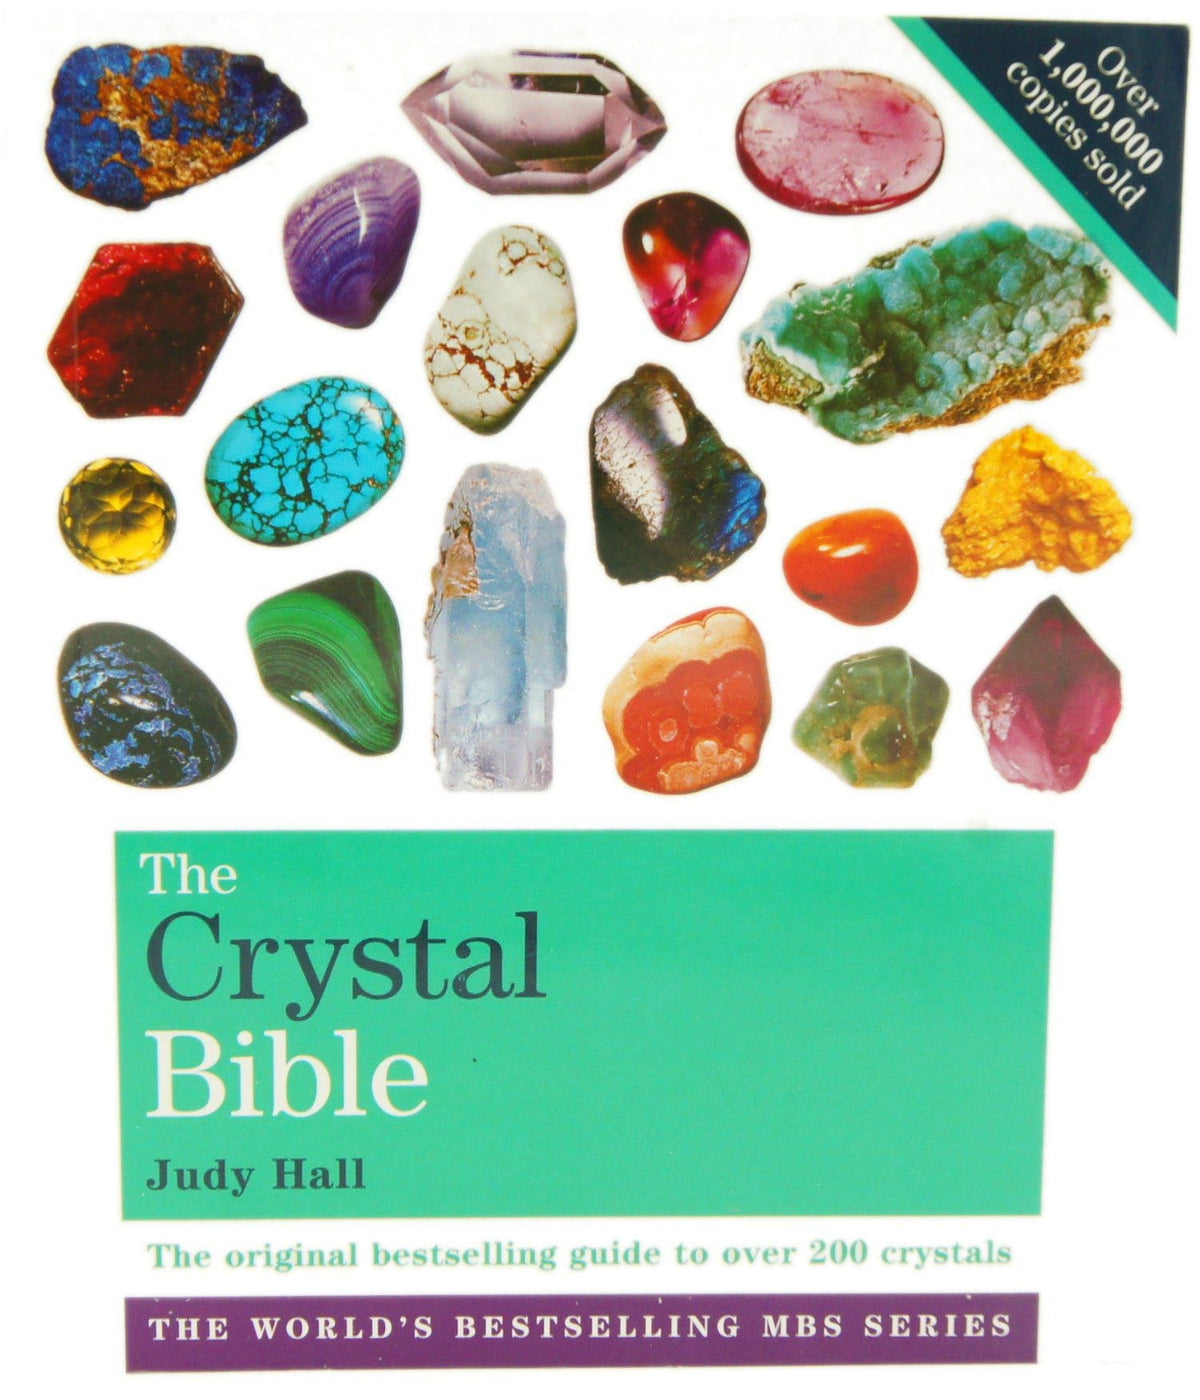 The Crystal Bible: Volume 1 Octopus Books, Crystal Bible, Crystals